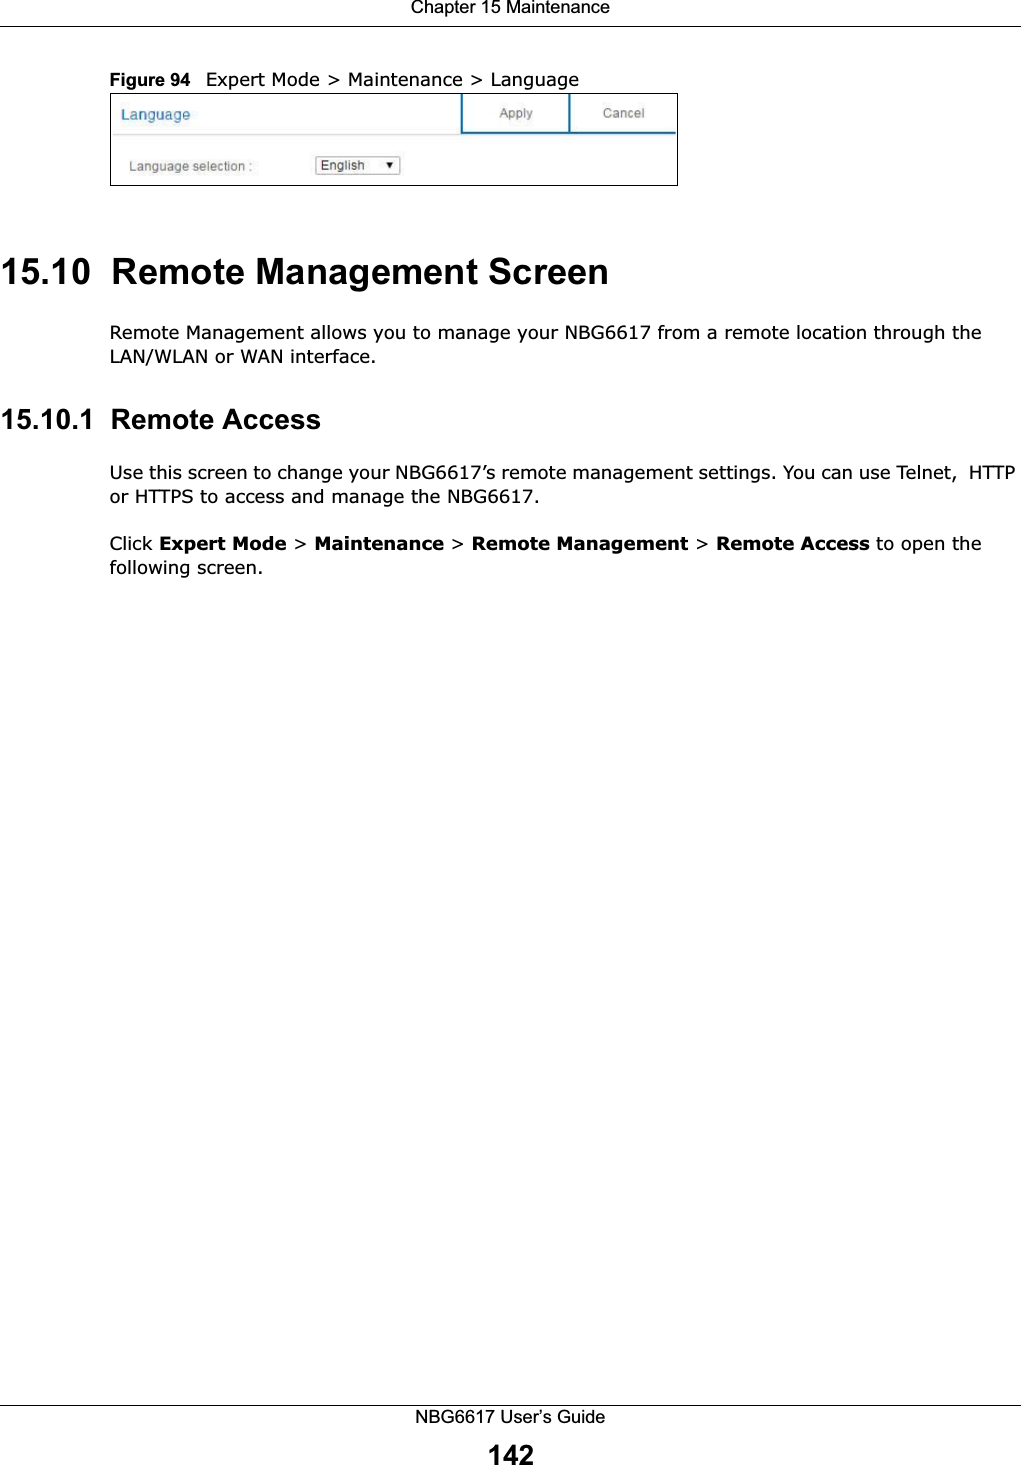 Chapter 15 MaintenanceNBG6617 User’s Guide142Figure 94   Expert Mode &gt; Maintenance &gt; Language 15.10  Remote Management ScreenRemote Management allows you to manage your NBG6617 from a remote location through the LAN/WLAN or WAN interface.15.10.1  Remote Access Use this screen to change your NBG6617’s remote management settings. You can use Telnet,  HTTP or HTTPS to access and manage the NBG6617. Click Expert Mode &gt; Maintenance &gt; Remote Management &gt; Remote Access to open the following screen.